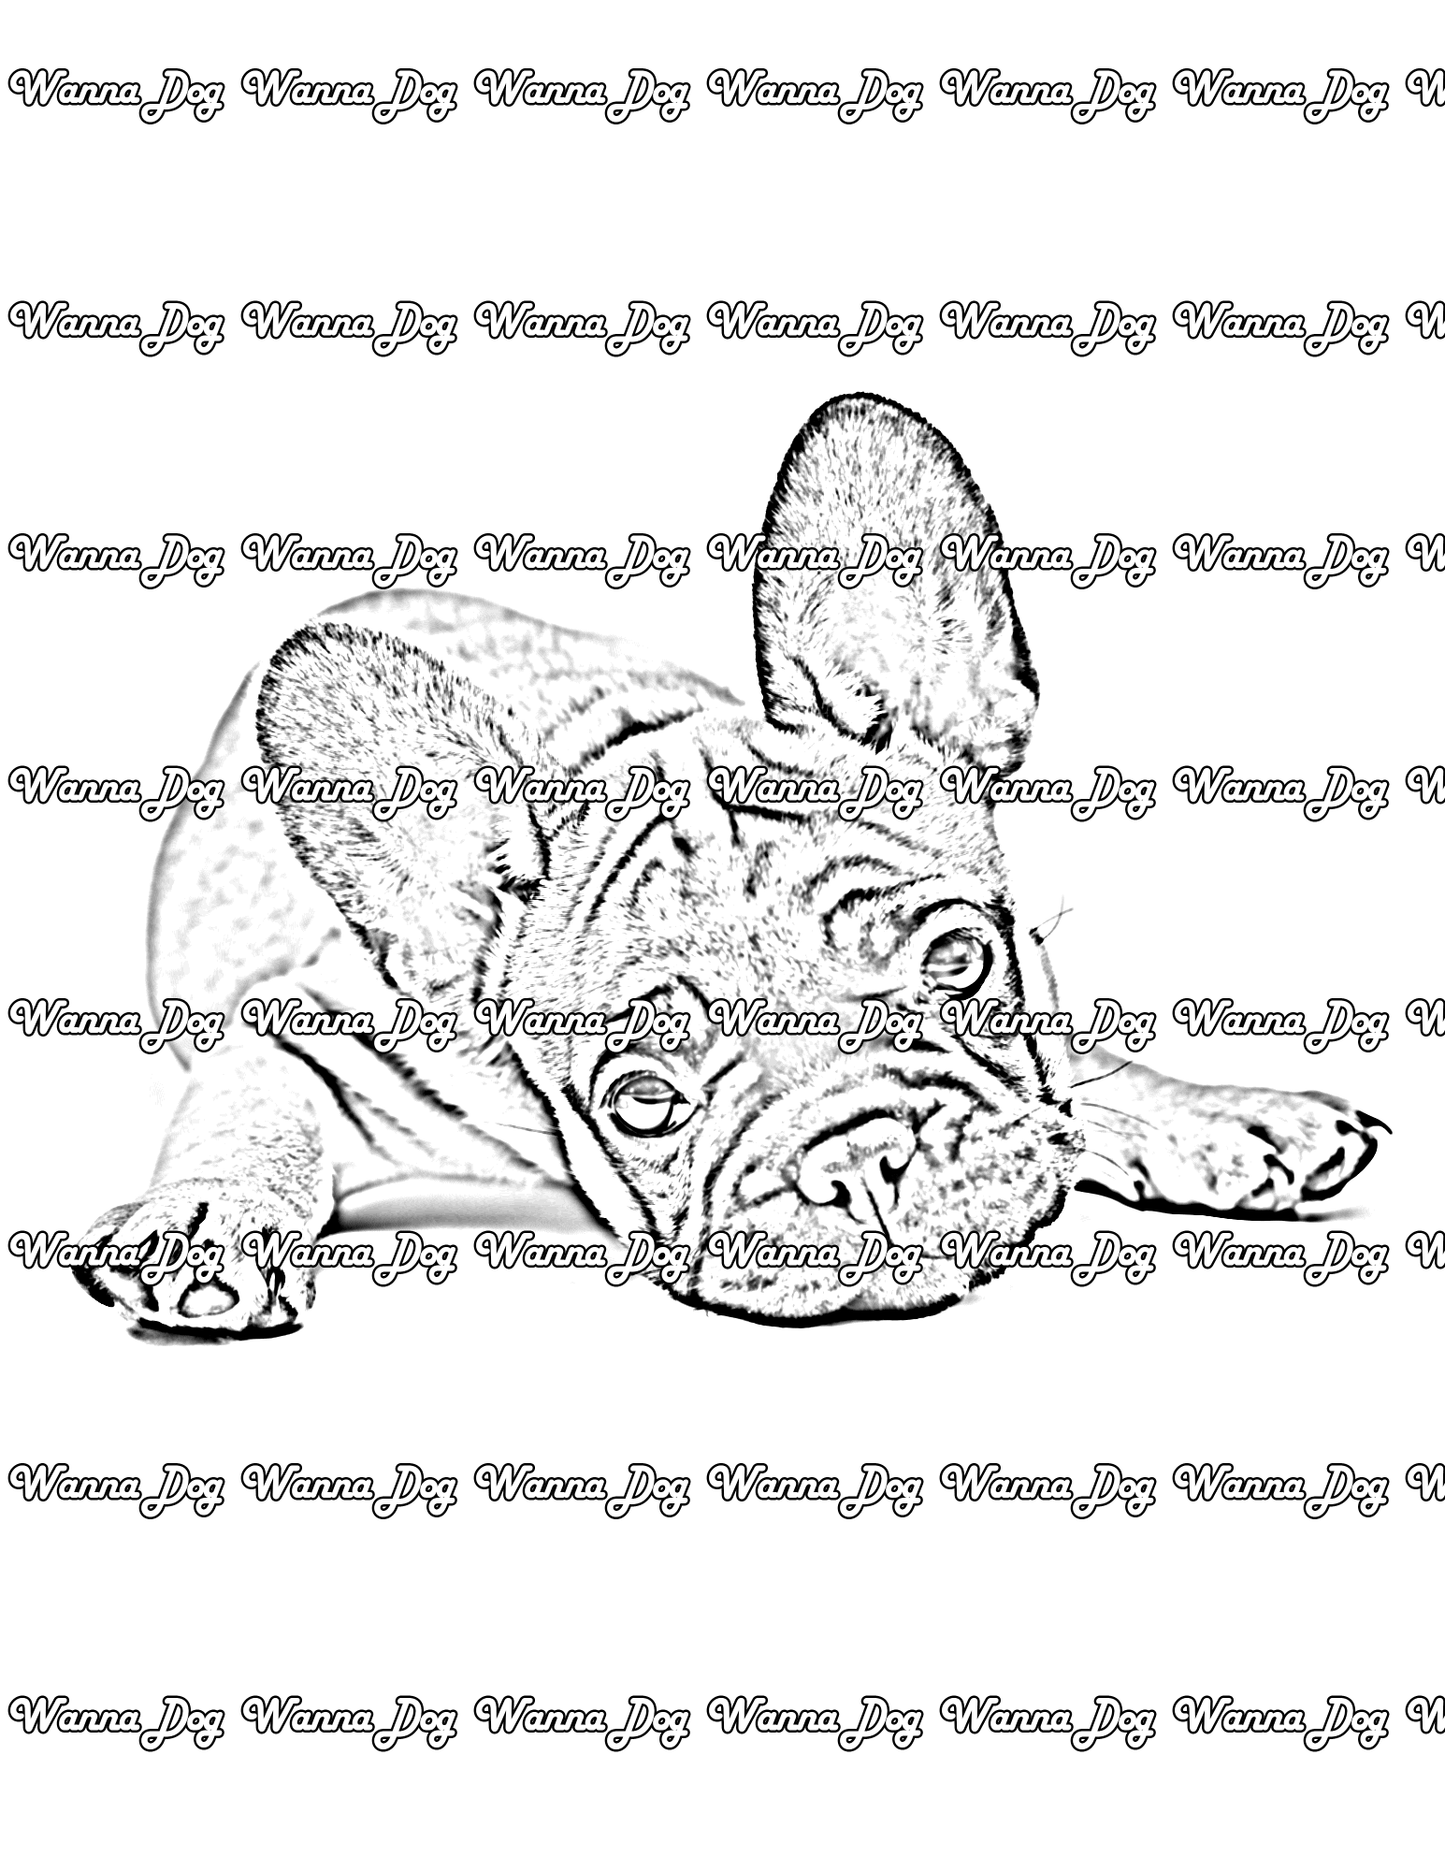 French Bulldog Puppy Coloring Page of a French Bulldog Puppy laying down with their ears up